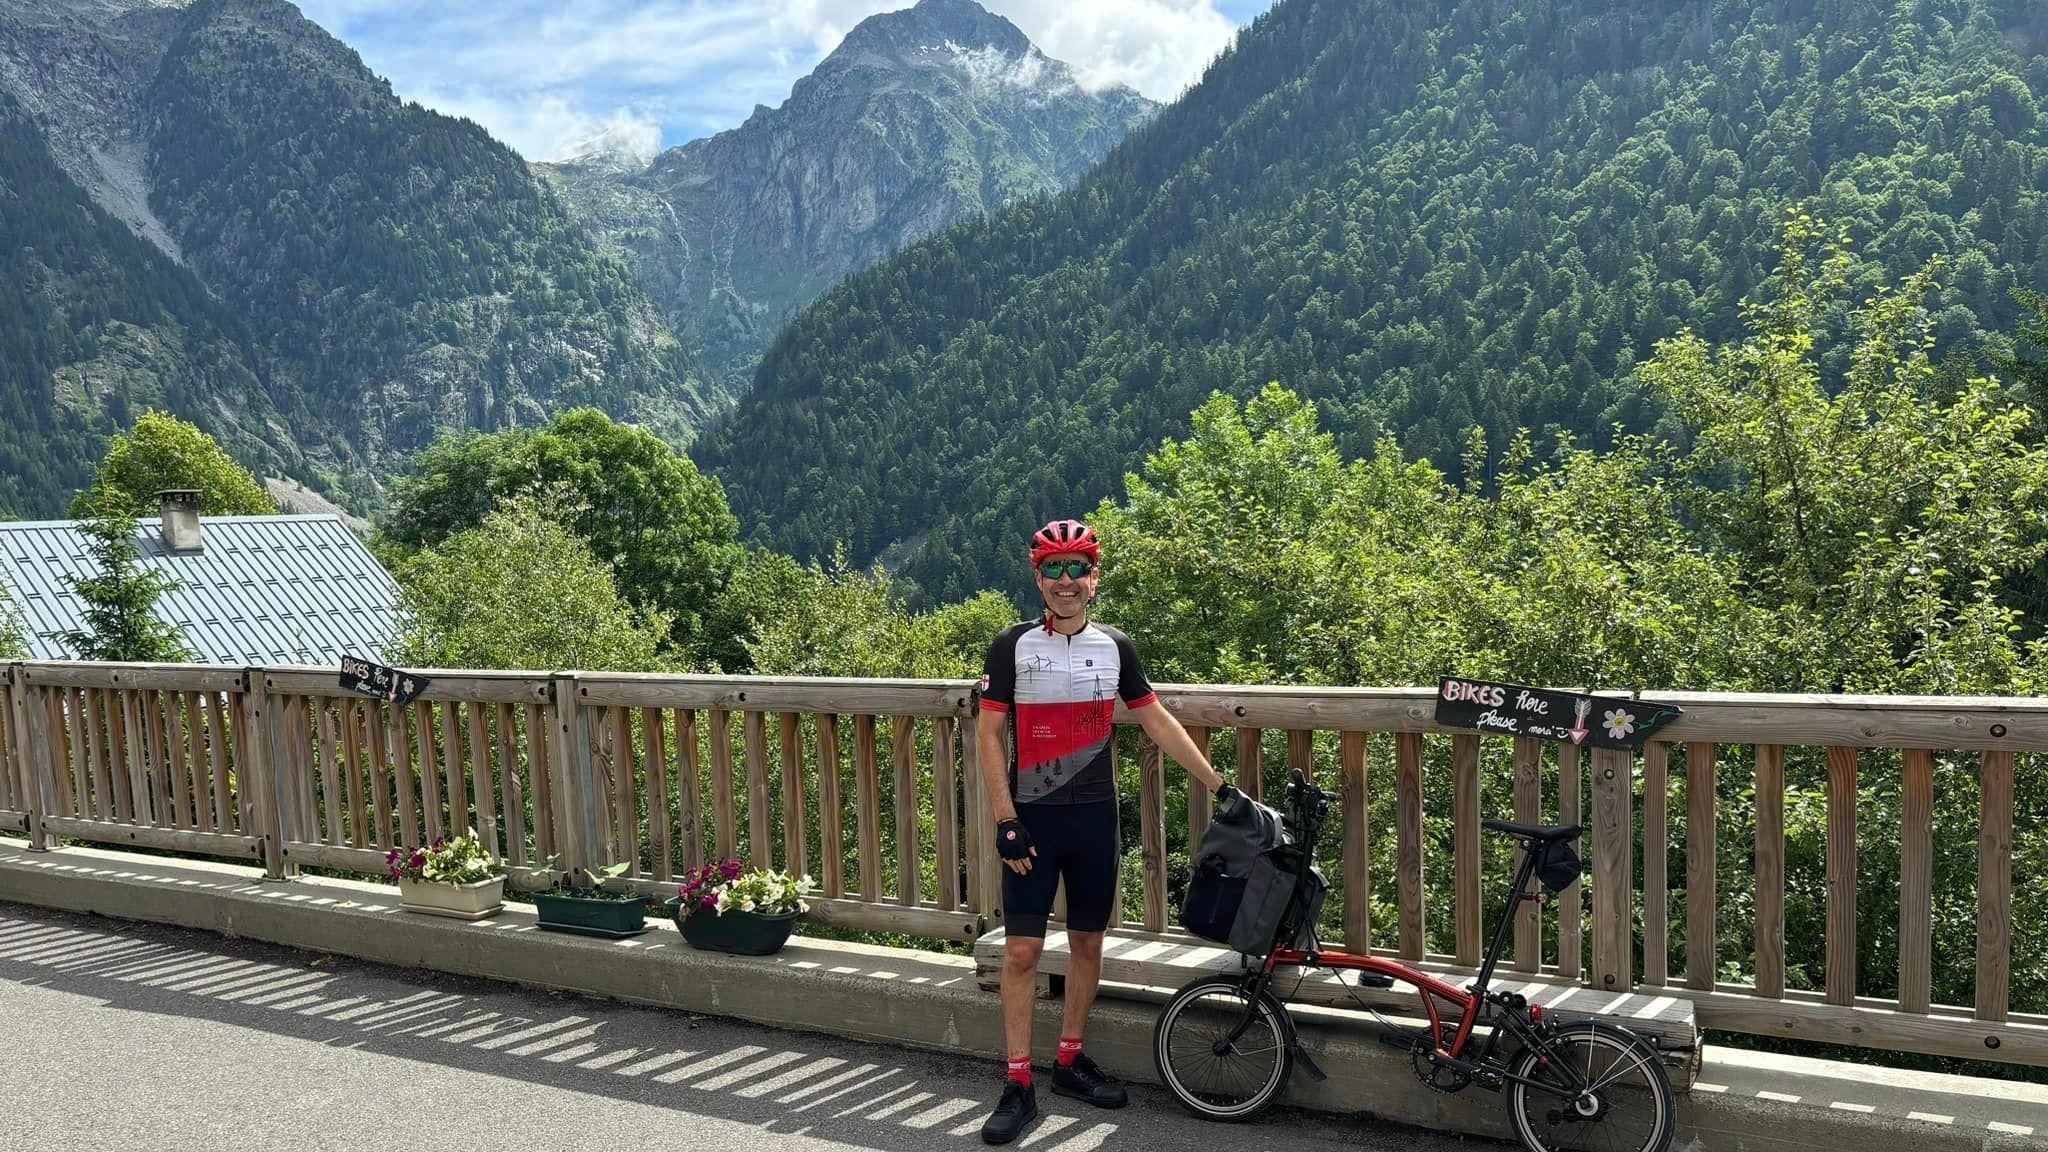 A smiling man in cycle gear with a portable city bike in front of a specatcular mountain range